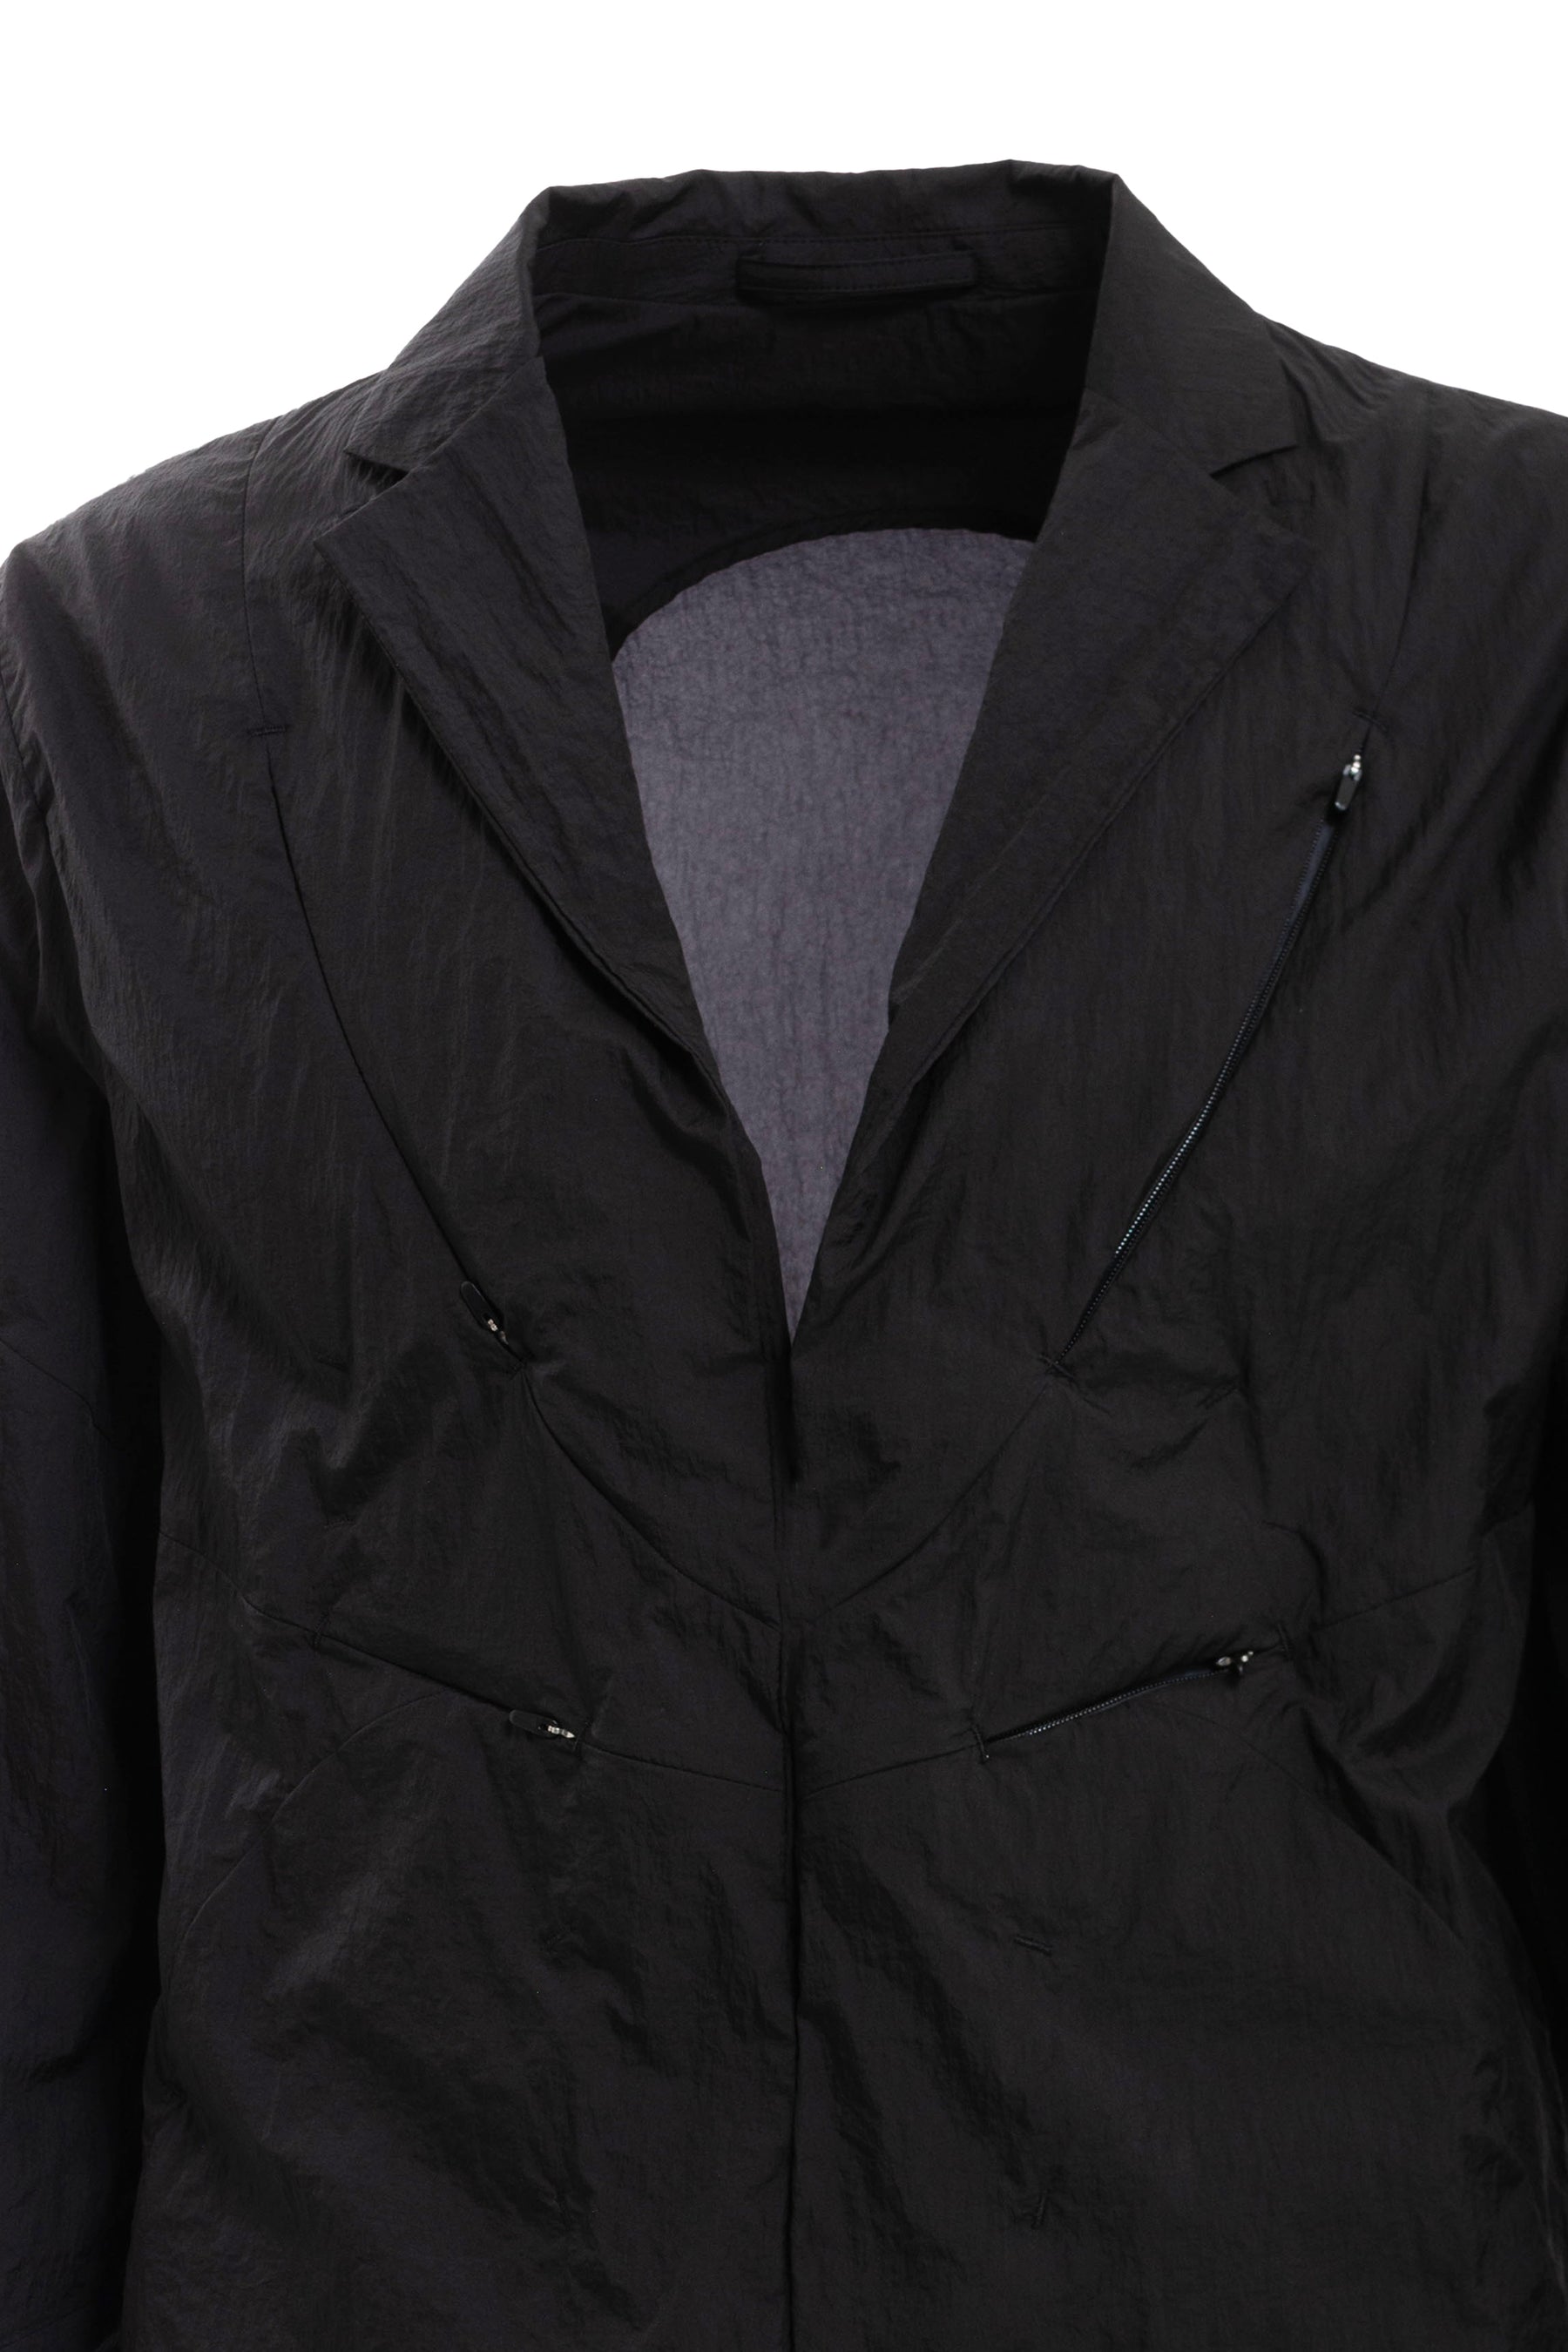 POST ARCHIVE FACTION SS23 5.0+ JACKET CENTER / BLK/CHA - NUBIAN